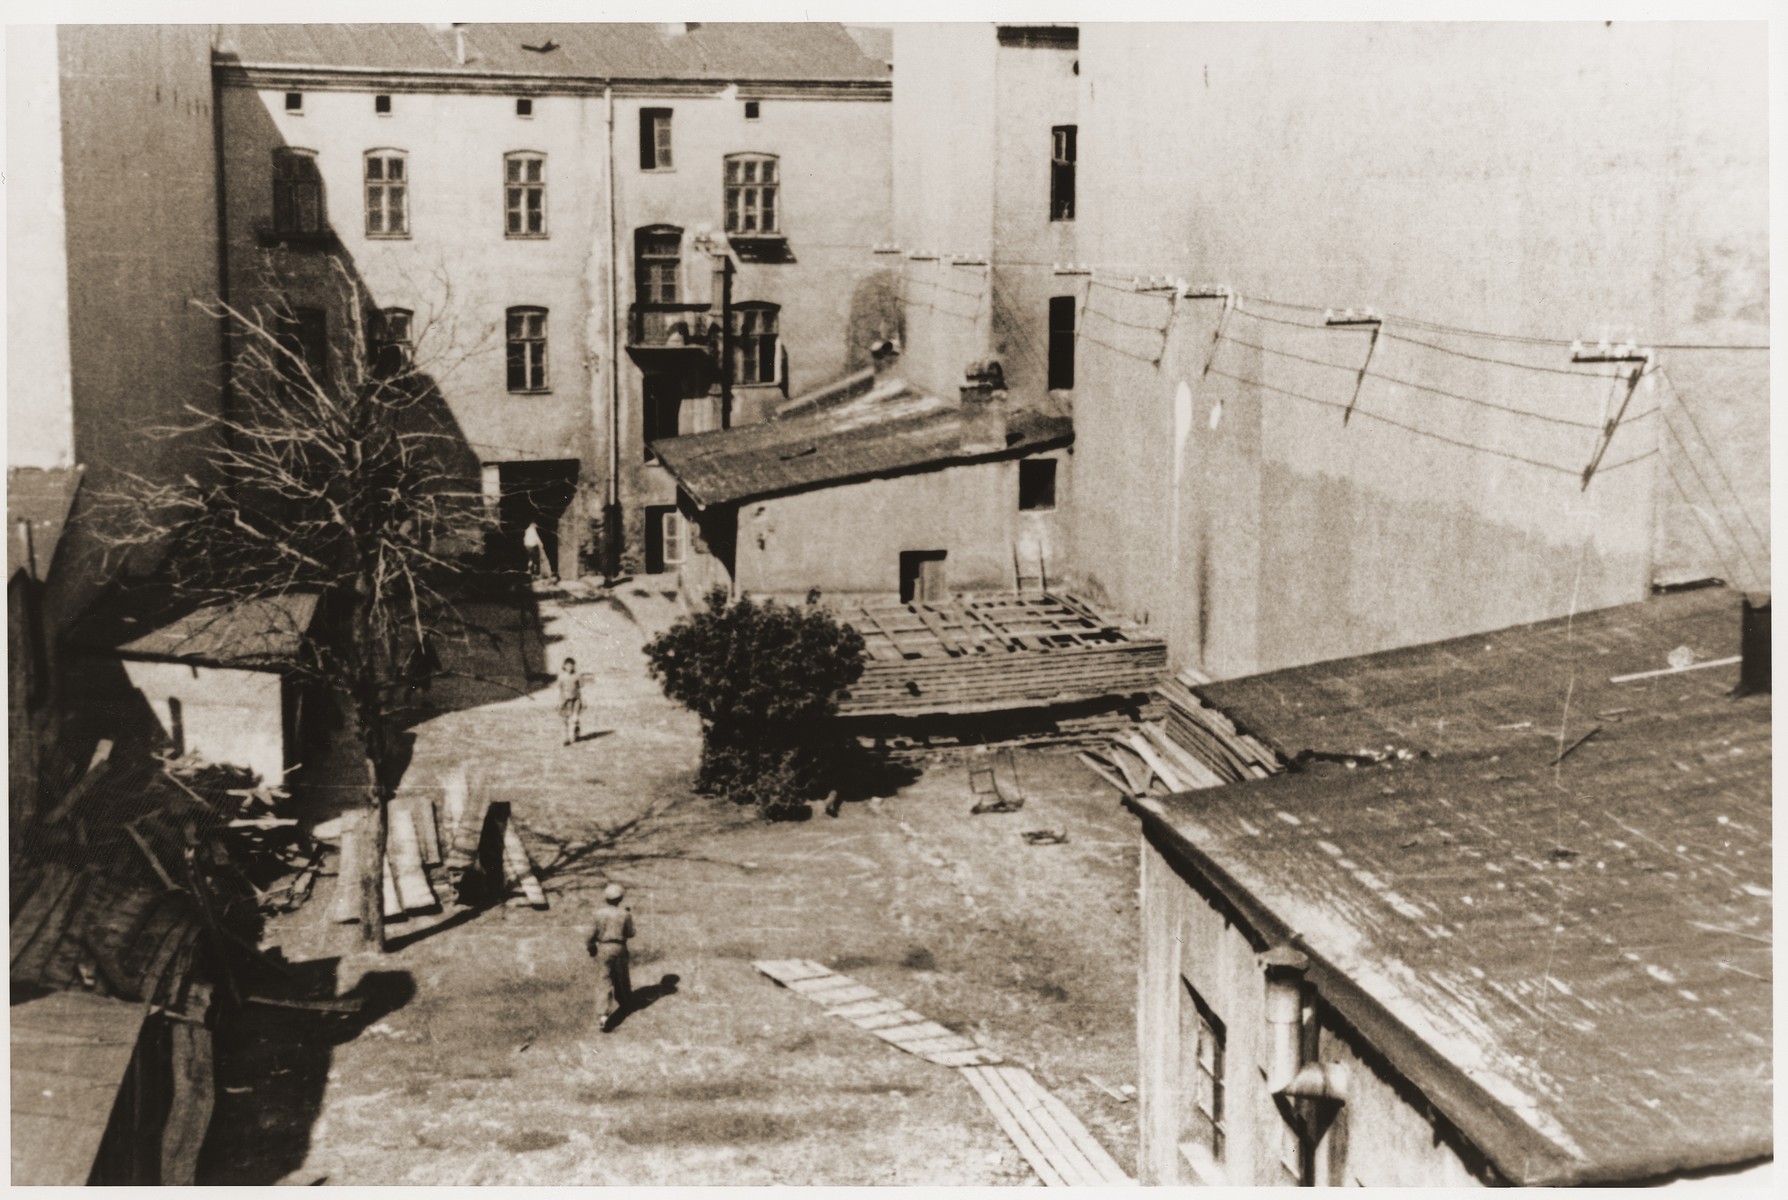 View of a large courtyard in the Bedzin ghetto.